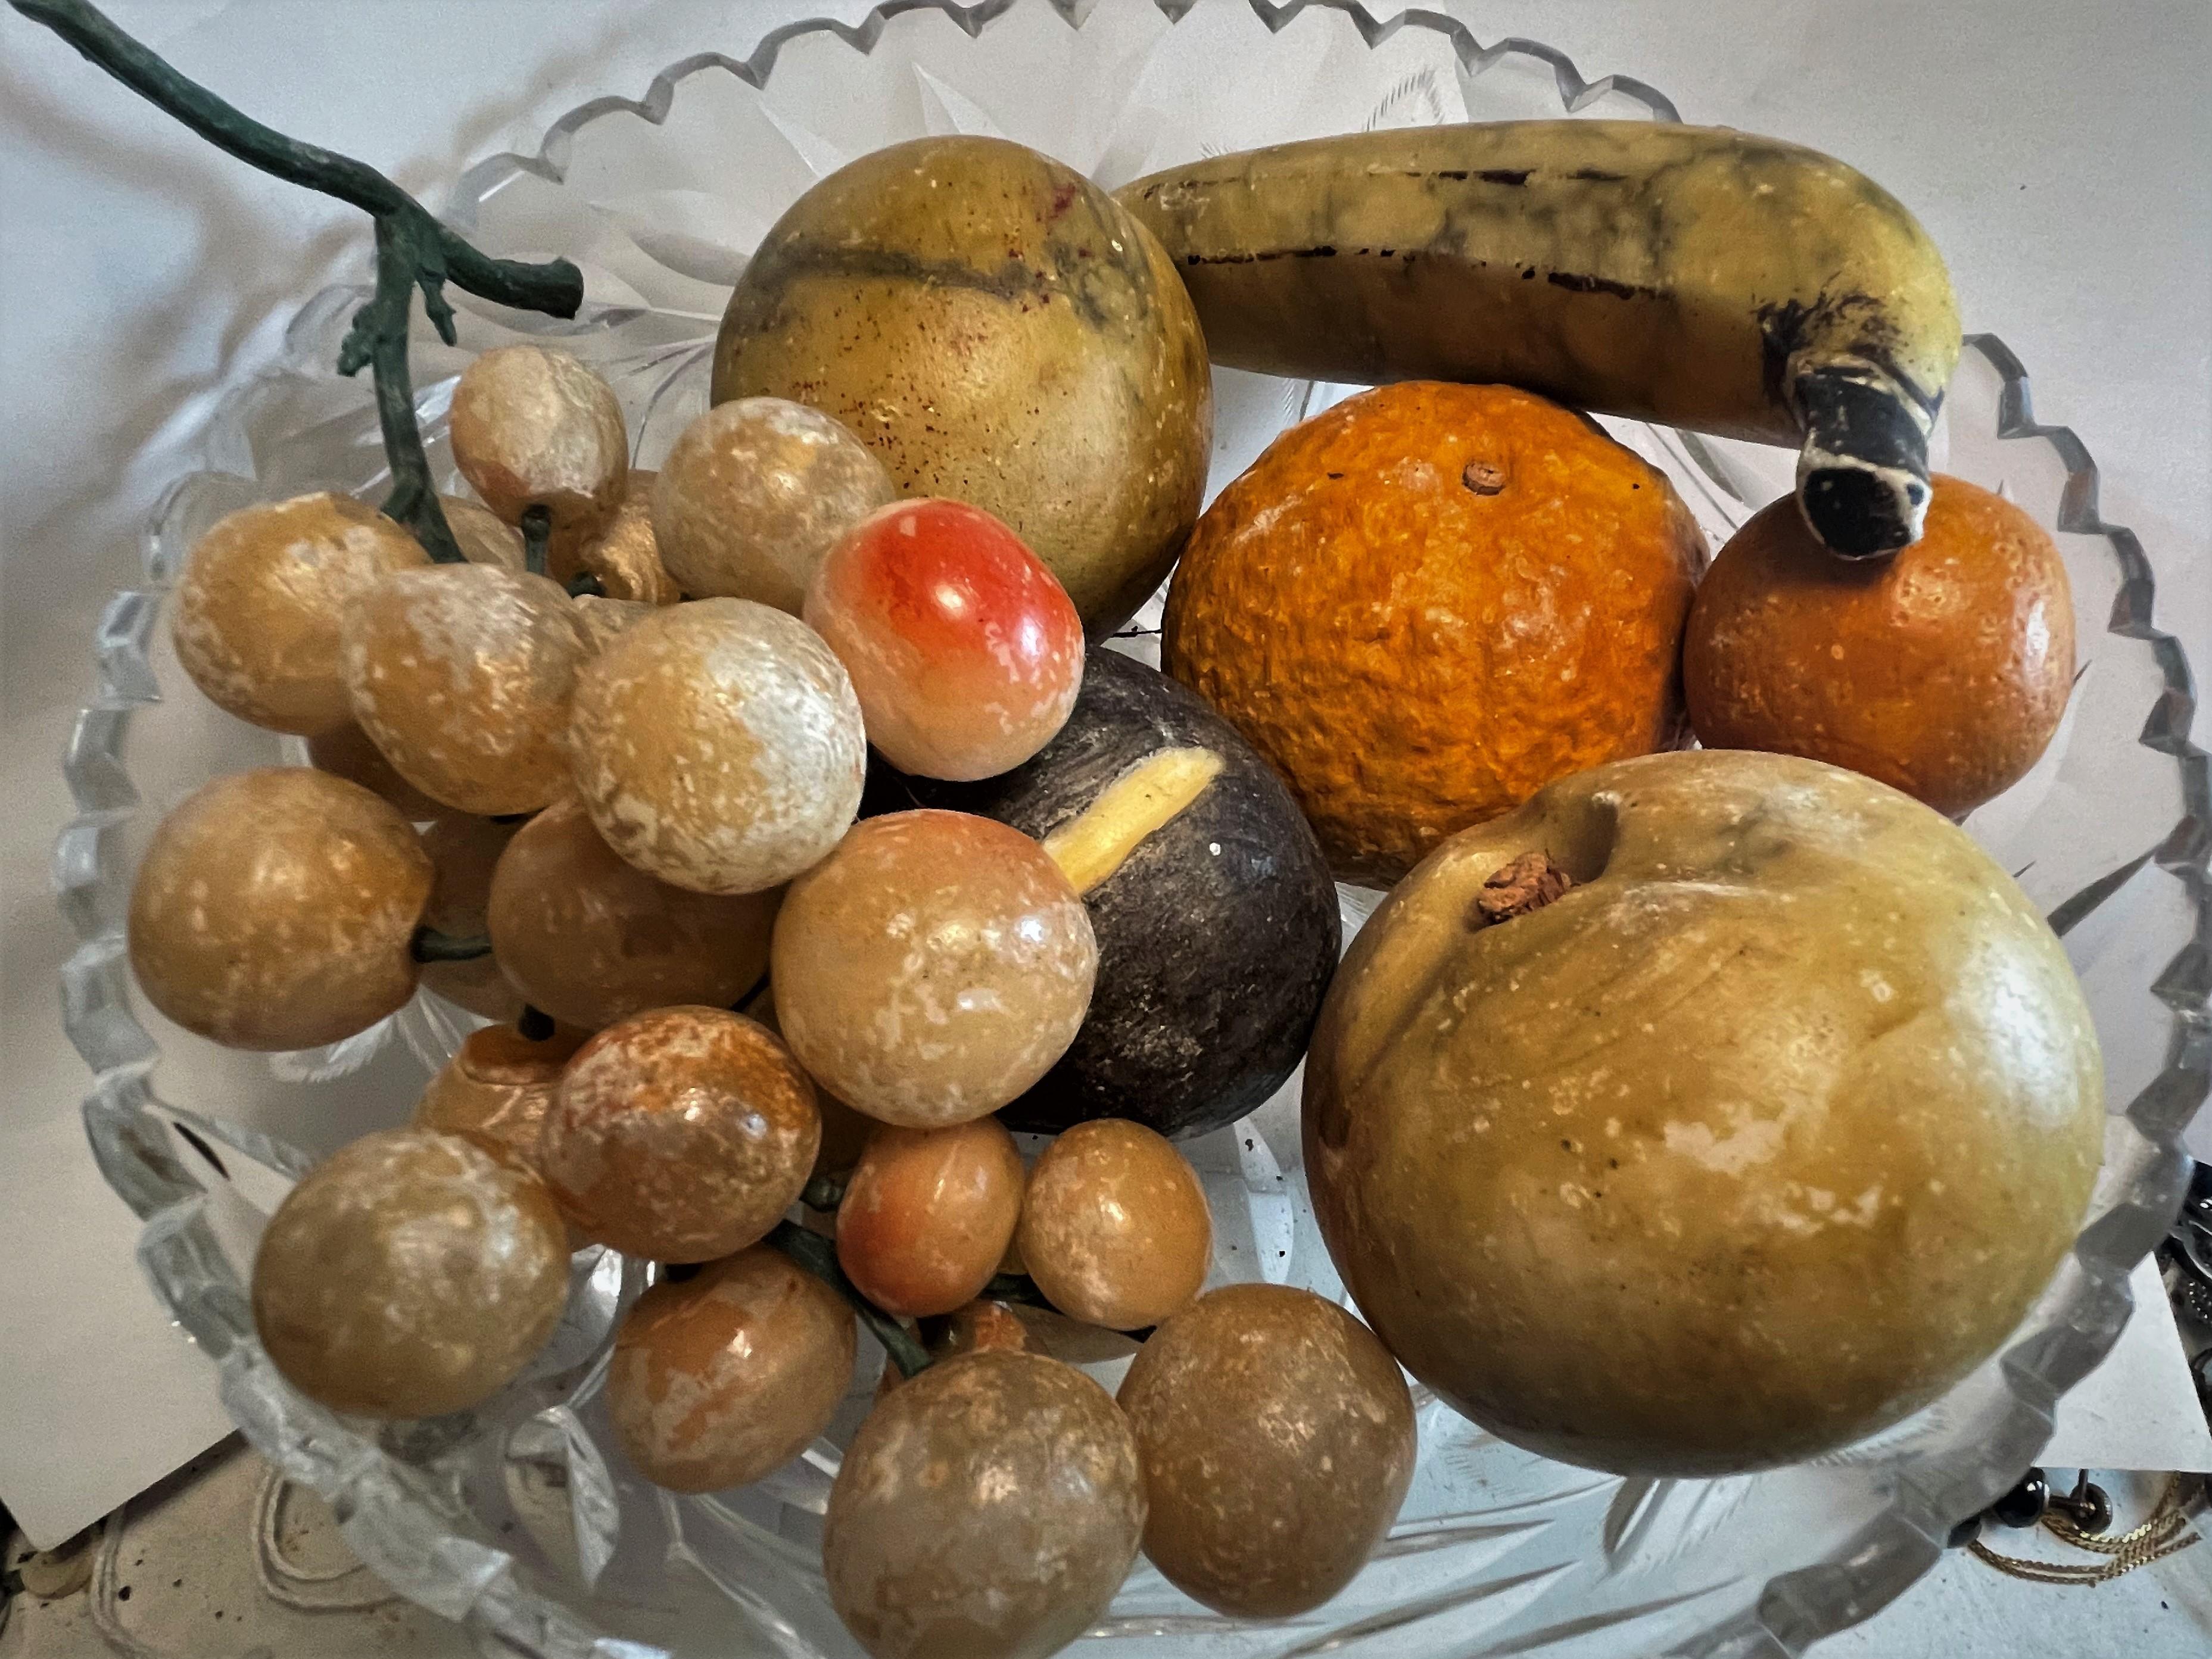 Here is a great looking set of 7 pieces of carved stone fruit with a wonderful realistic look that would make any décor colorful and classy. There are some imperfections on these pieces that I have photographed, the pear is missing it's stem and has